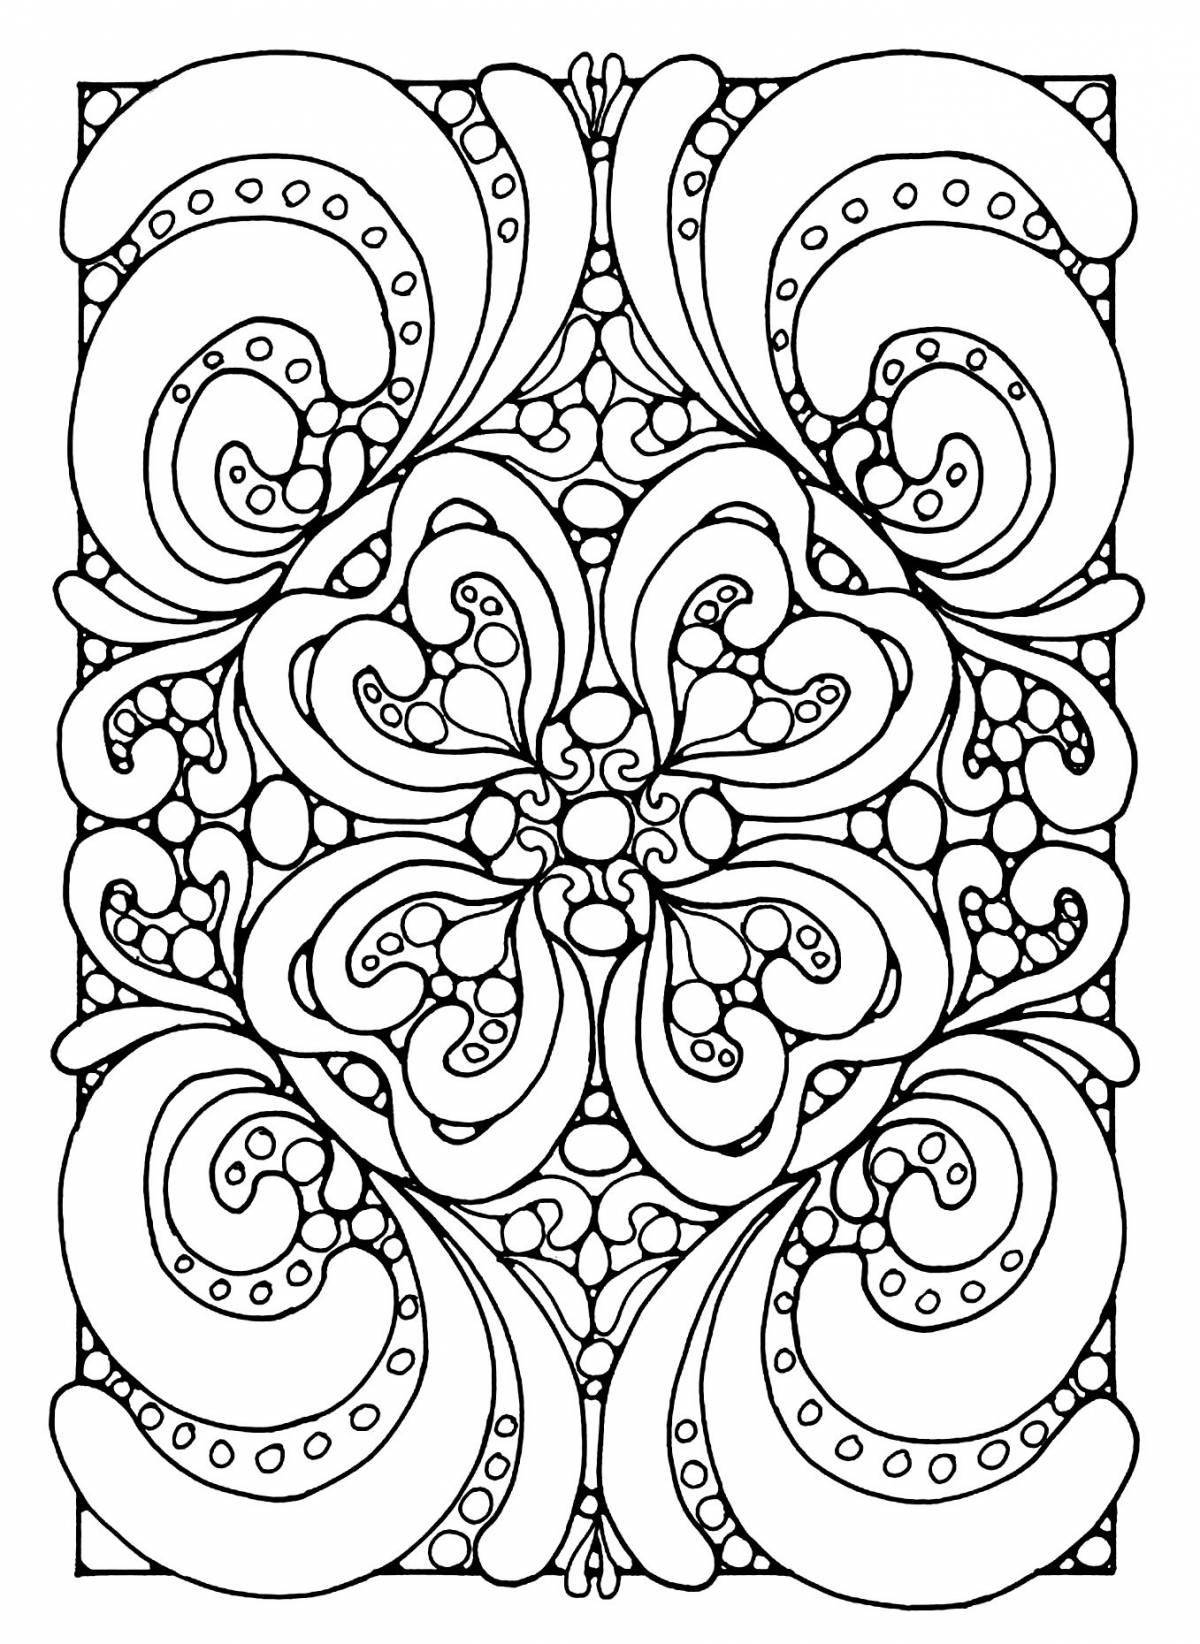 Adorable patterns and ornaments for coloring for children